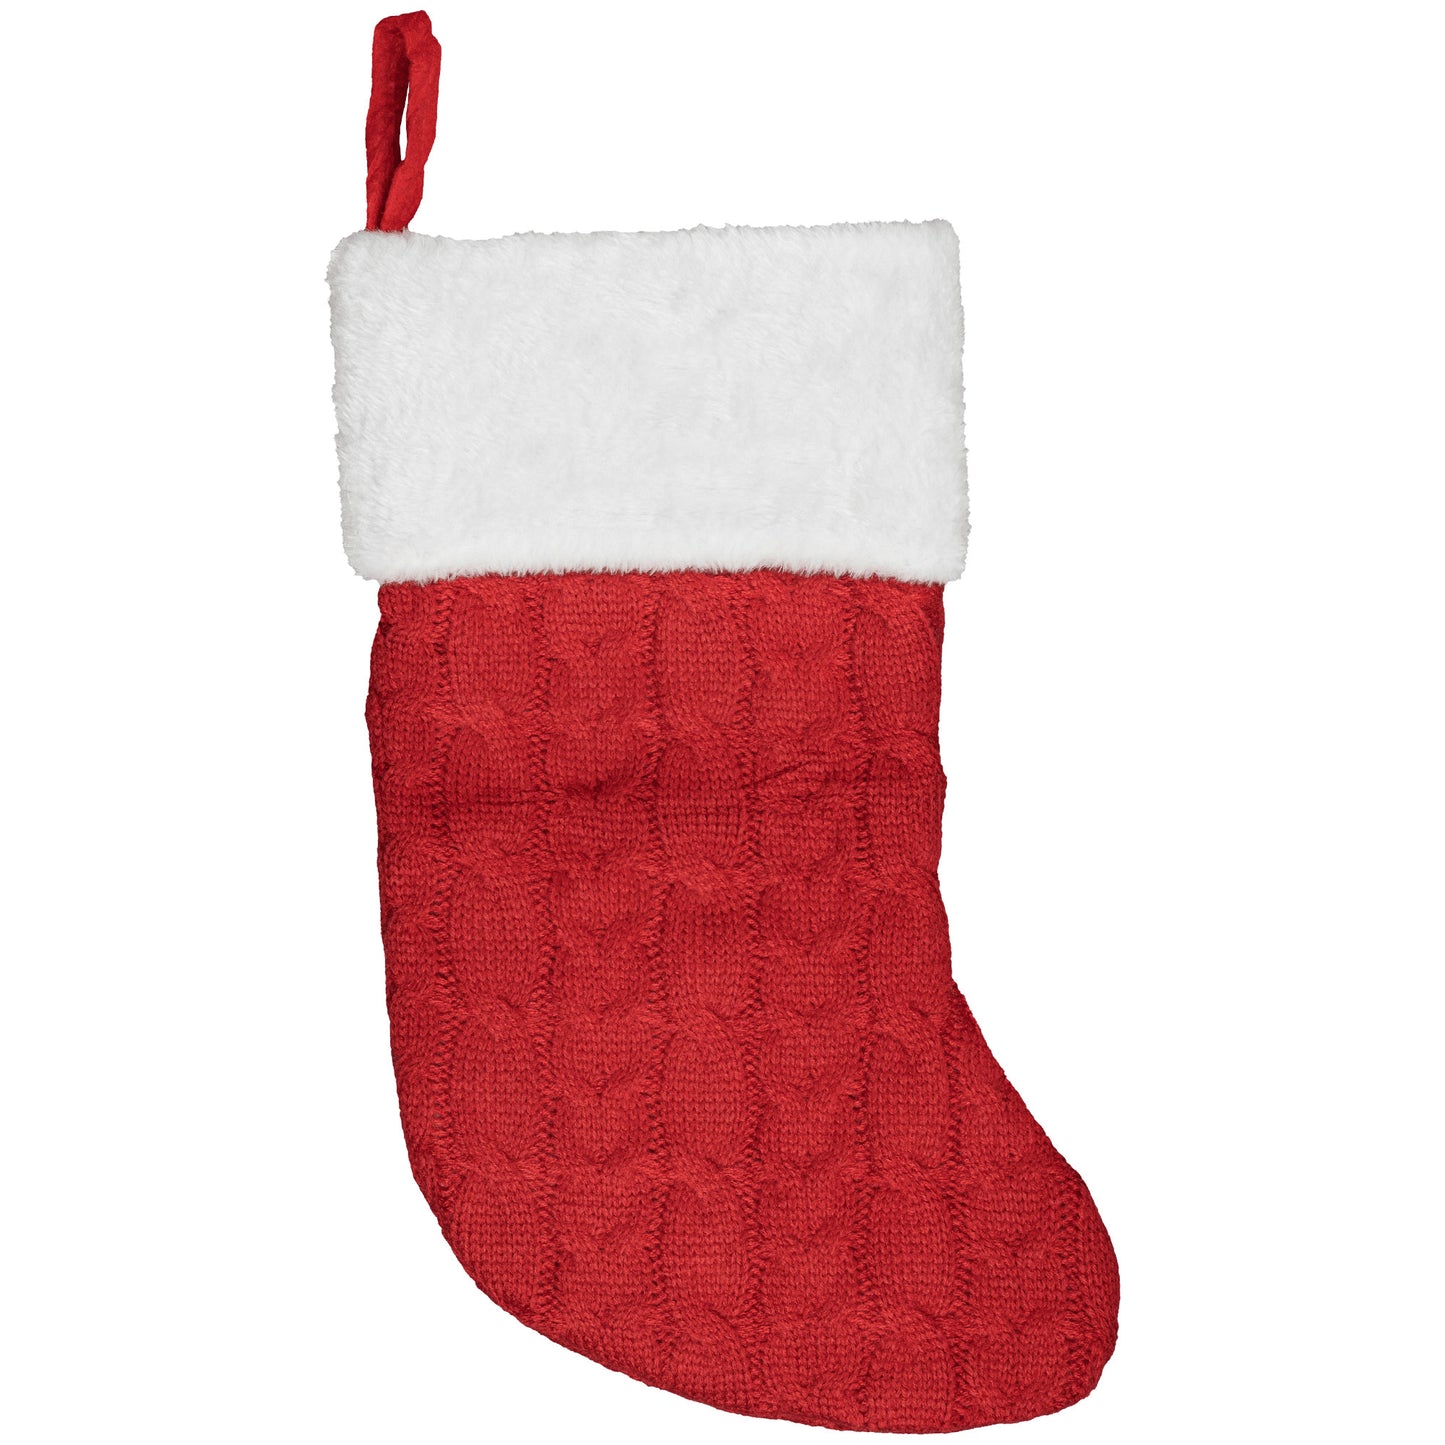 Personalized Christmas Stocking - Design Club Home